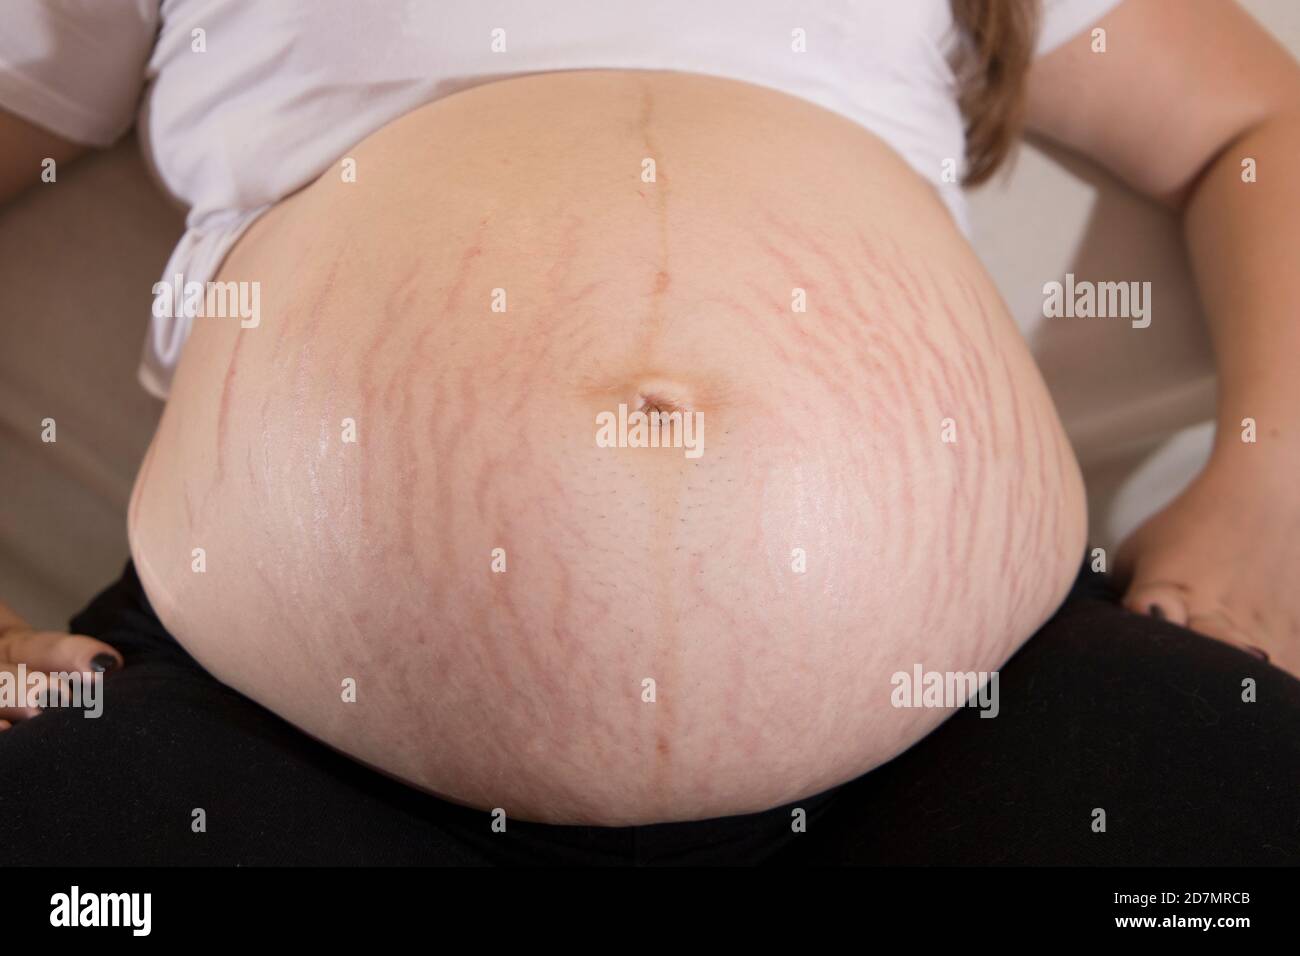 Female hanging belly with stretch marks on skin closeup